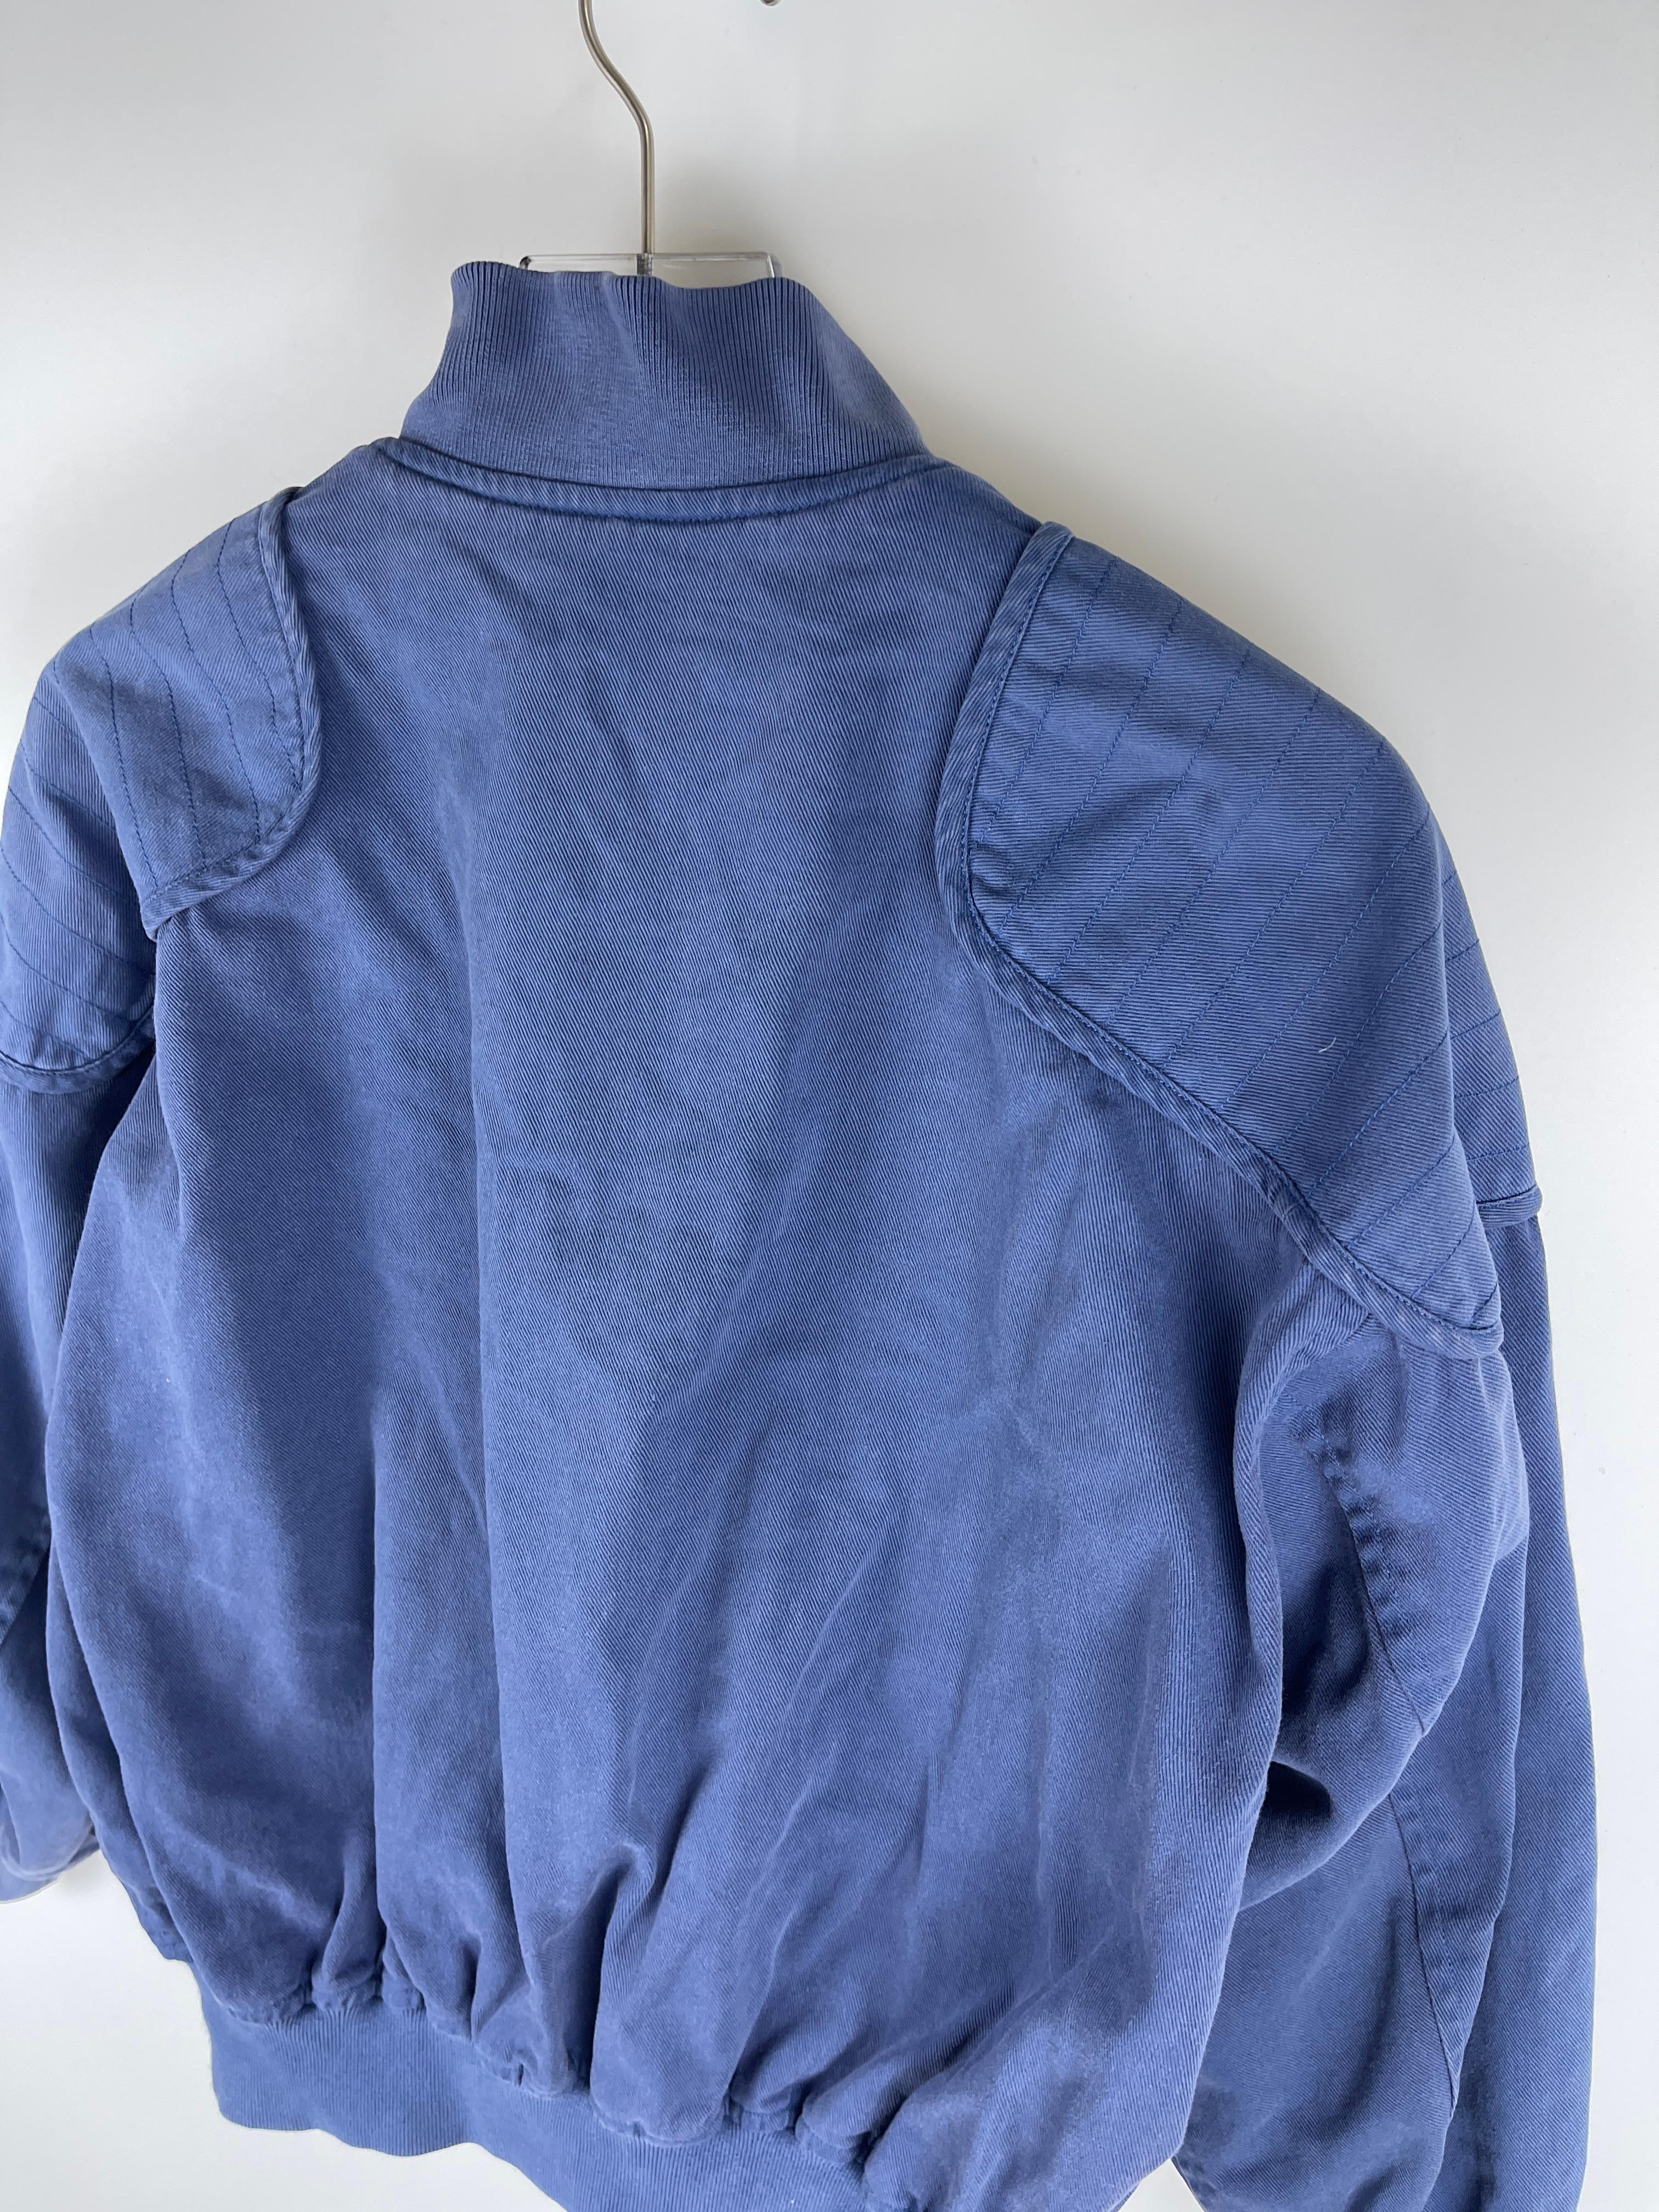 From Sport line. Sport like was a diffusion line of mainline Issey Miyake.

Size: 9, the size 9 in Issey Miyake products are equivalent to Europeand size Medium.

Condition: The item is 40 years old, so there are several signs and feel of